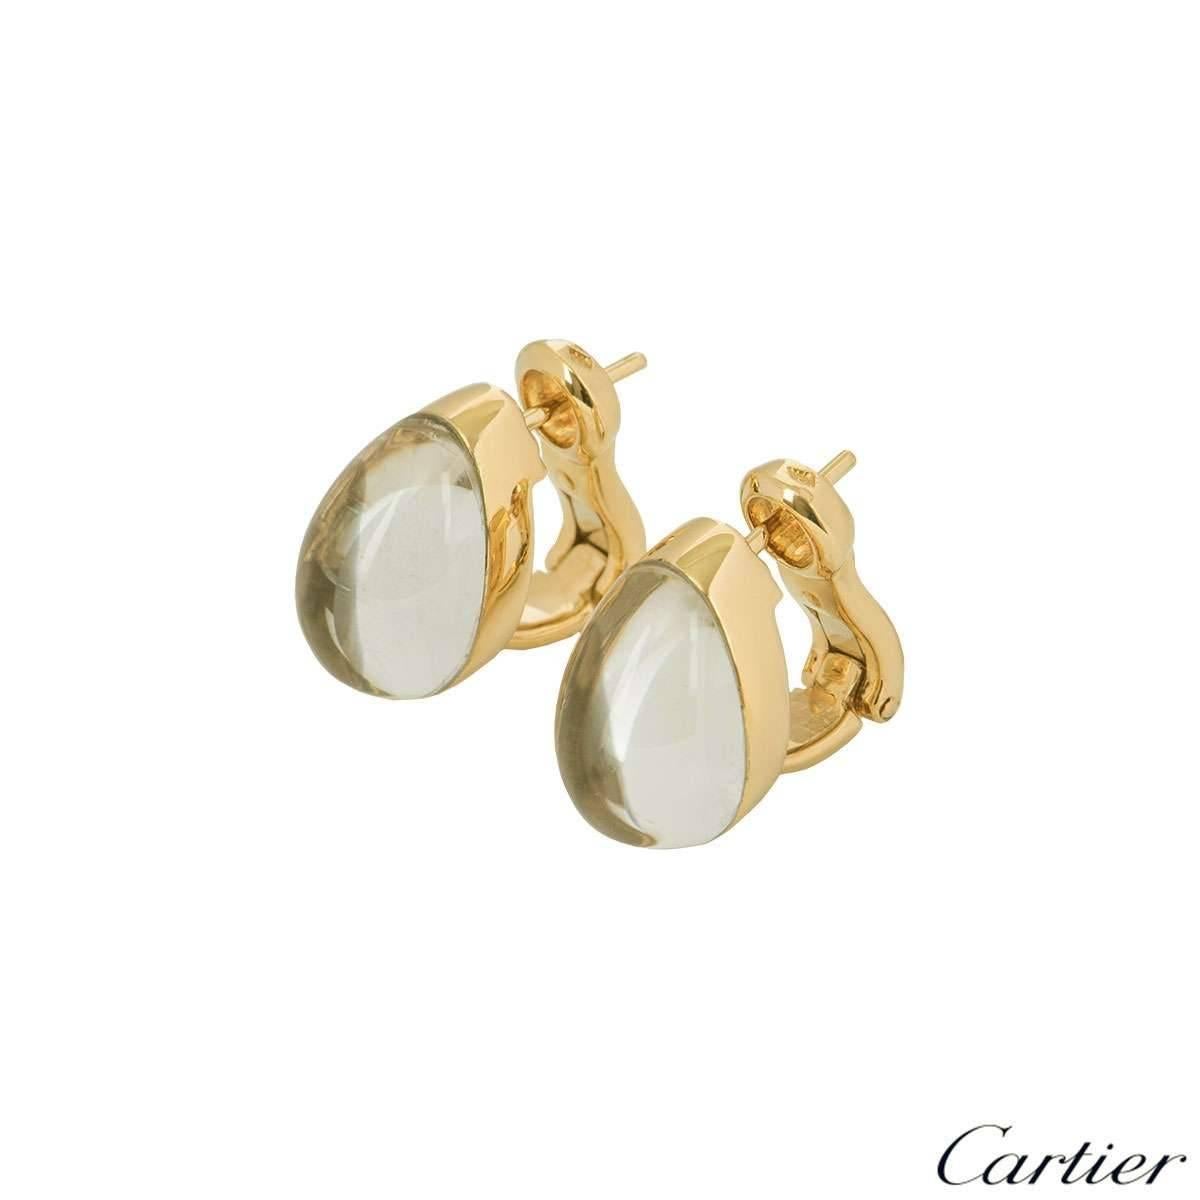 A pair of exquisite 18k yellow gold crystal and diamond earrings part of the Myst collection by Cartier. The earrings feature a domed rock crystal in an oval shape with a triple row of round brilliant cut diamonds embedded behind the layer of